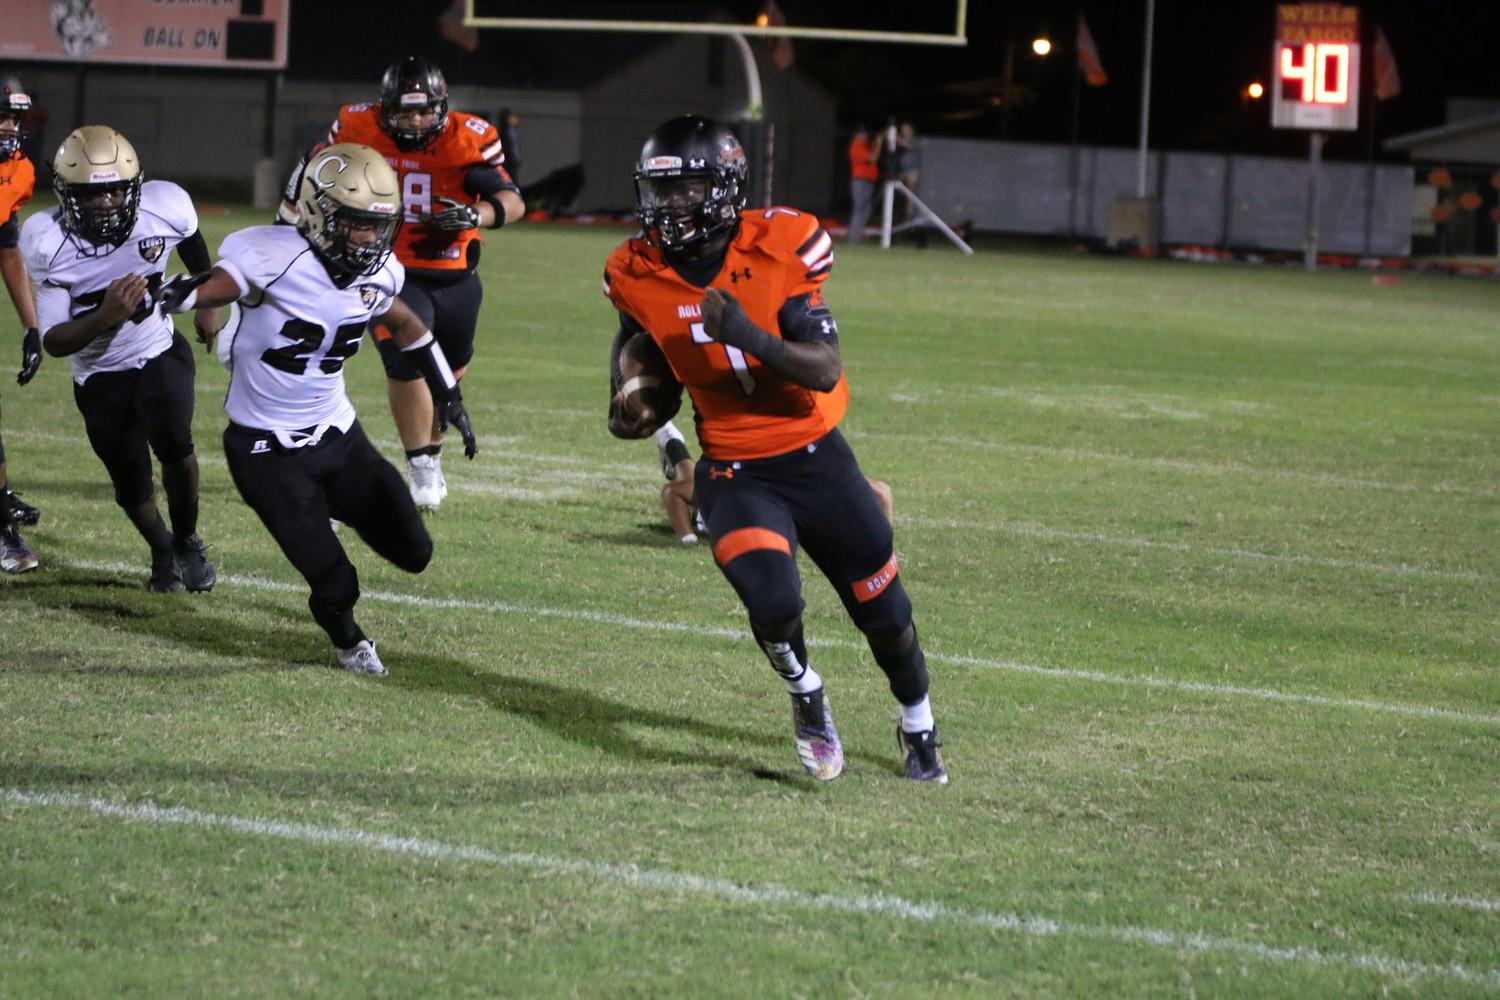 Elijah Holiday (7) busts out a 59 yard touchdown run in Gonzales' 35-0 lead at the half over Austin Crockett.